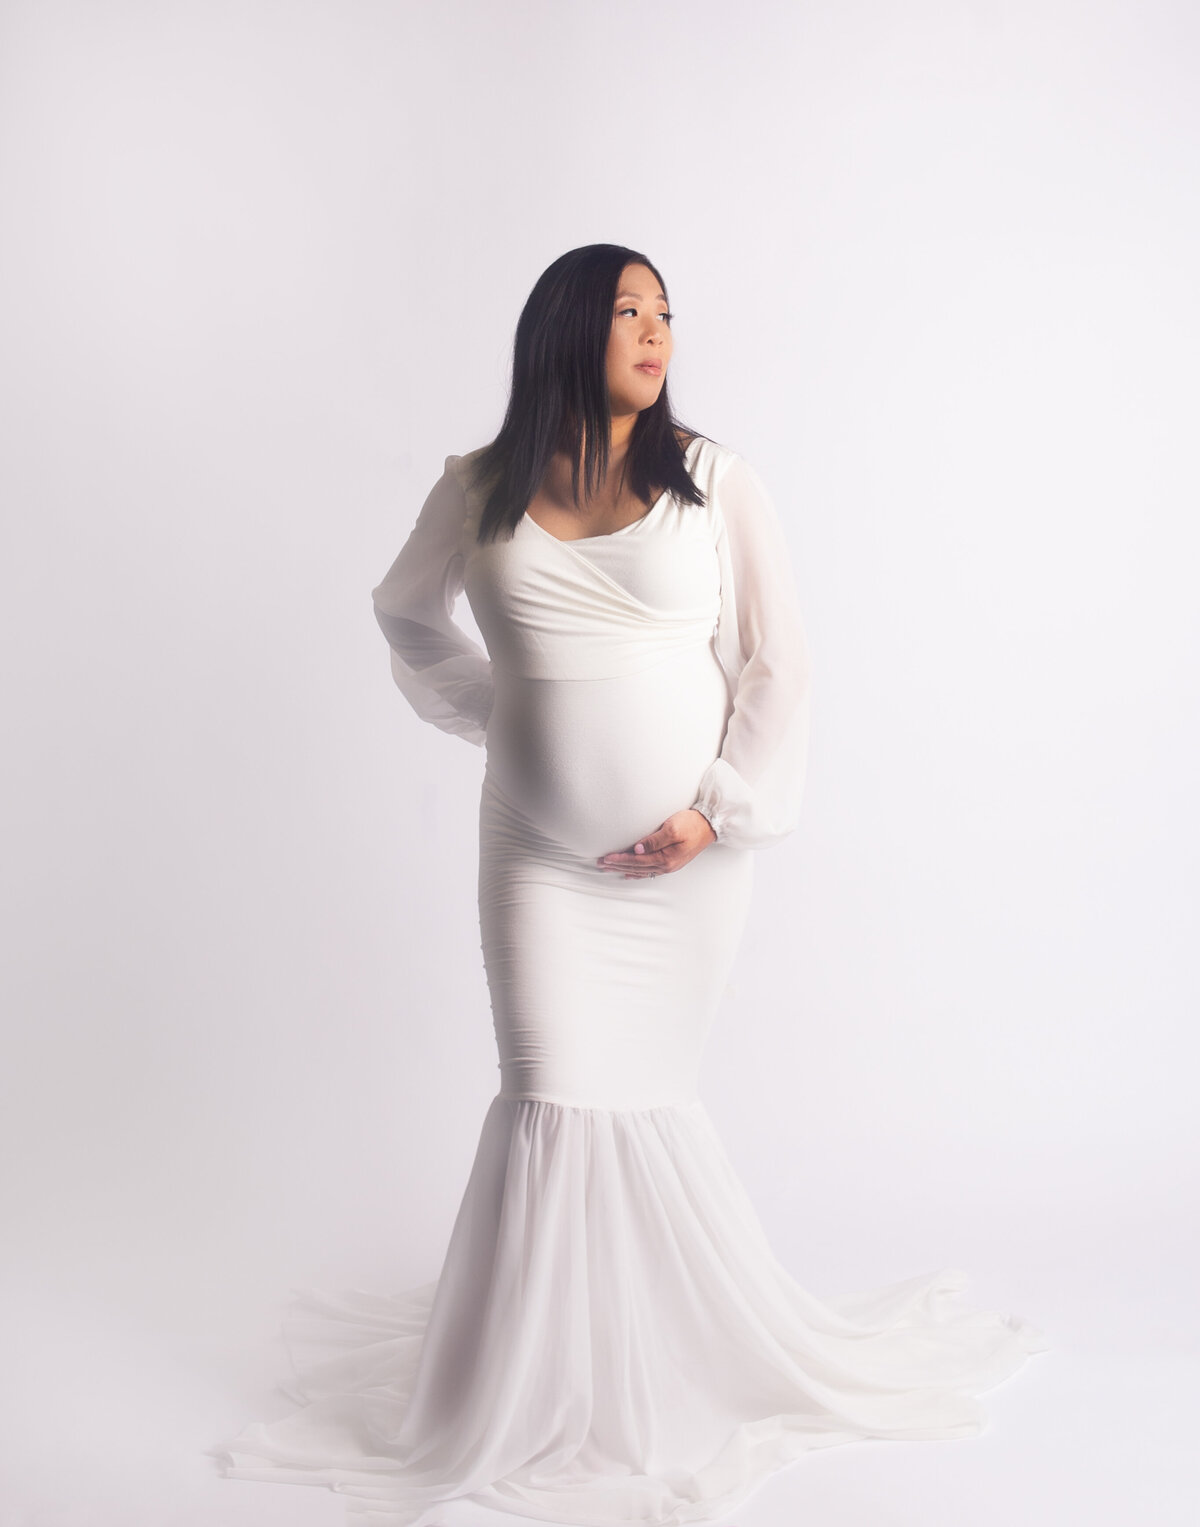 Wonen wearing white gown with glam makeup during maternity photoshoot in Franklin Tennessee photography studio